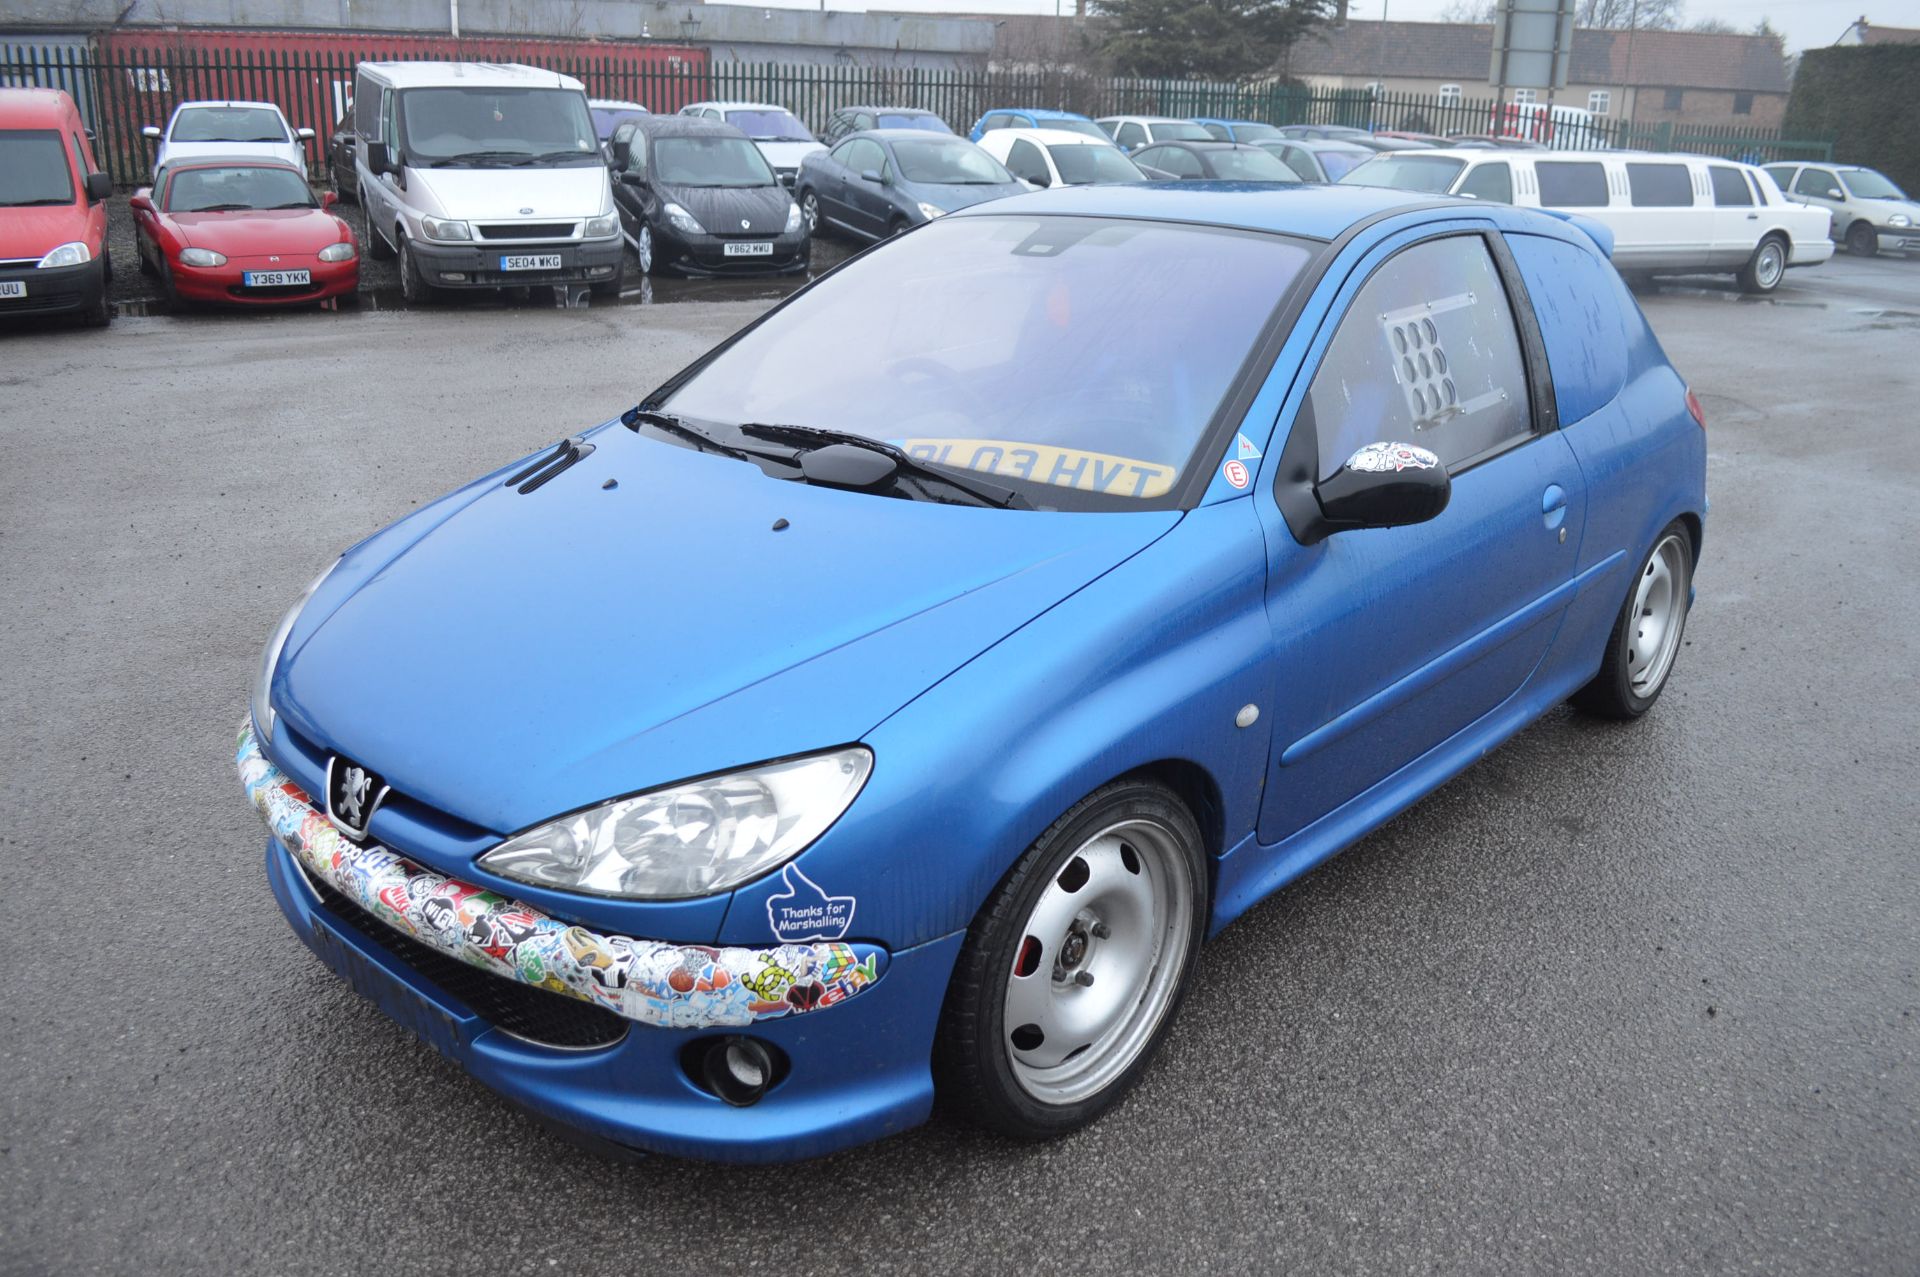 2003/03 REG PEUGEOT 206 GTI 180HP FAST TRACK DAY CAR  HAS THE 'VAN' PANELS FITTED INSTEAD OF REAR - Image 3 of 14